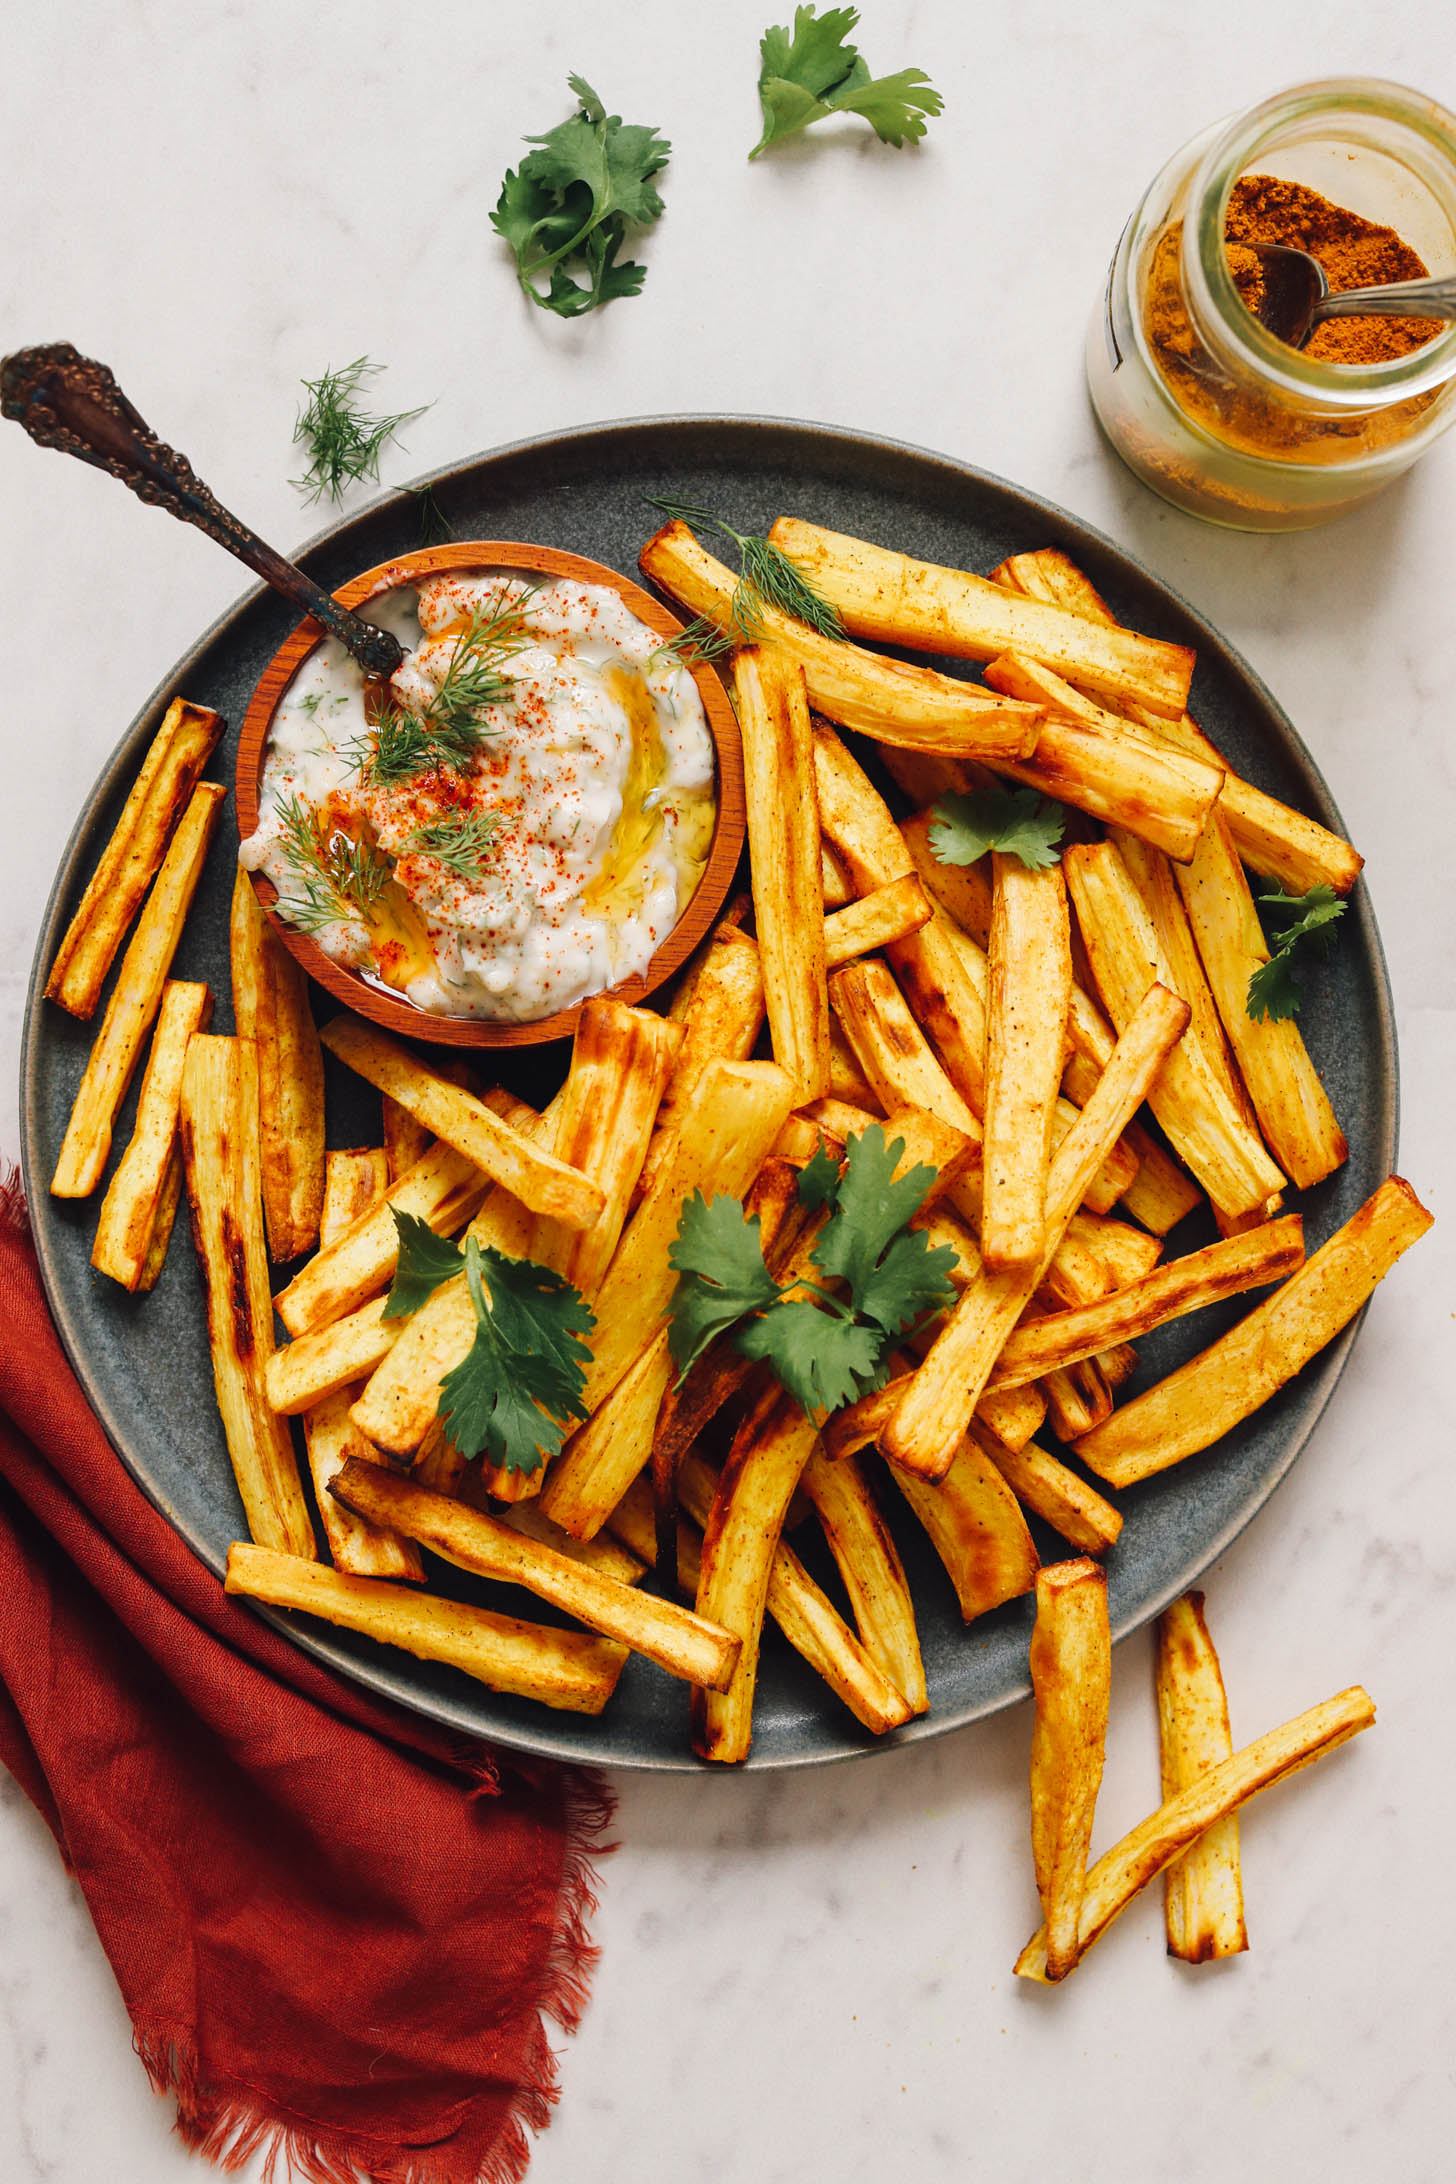 Curry powder next to a plate of baked parsnip fries and dairy-free yogurt sauce